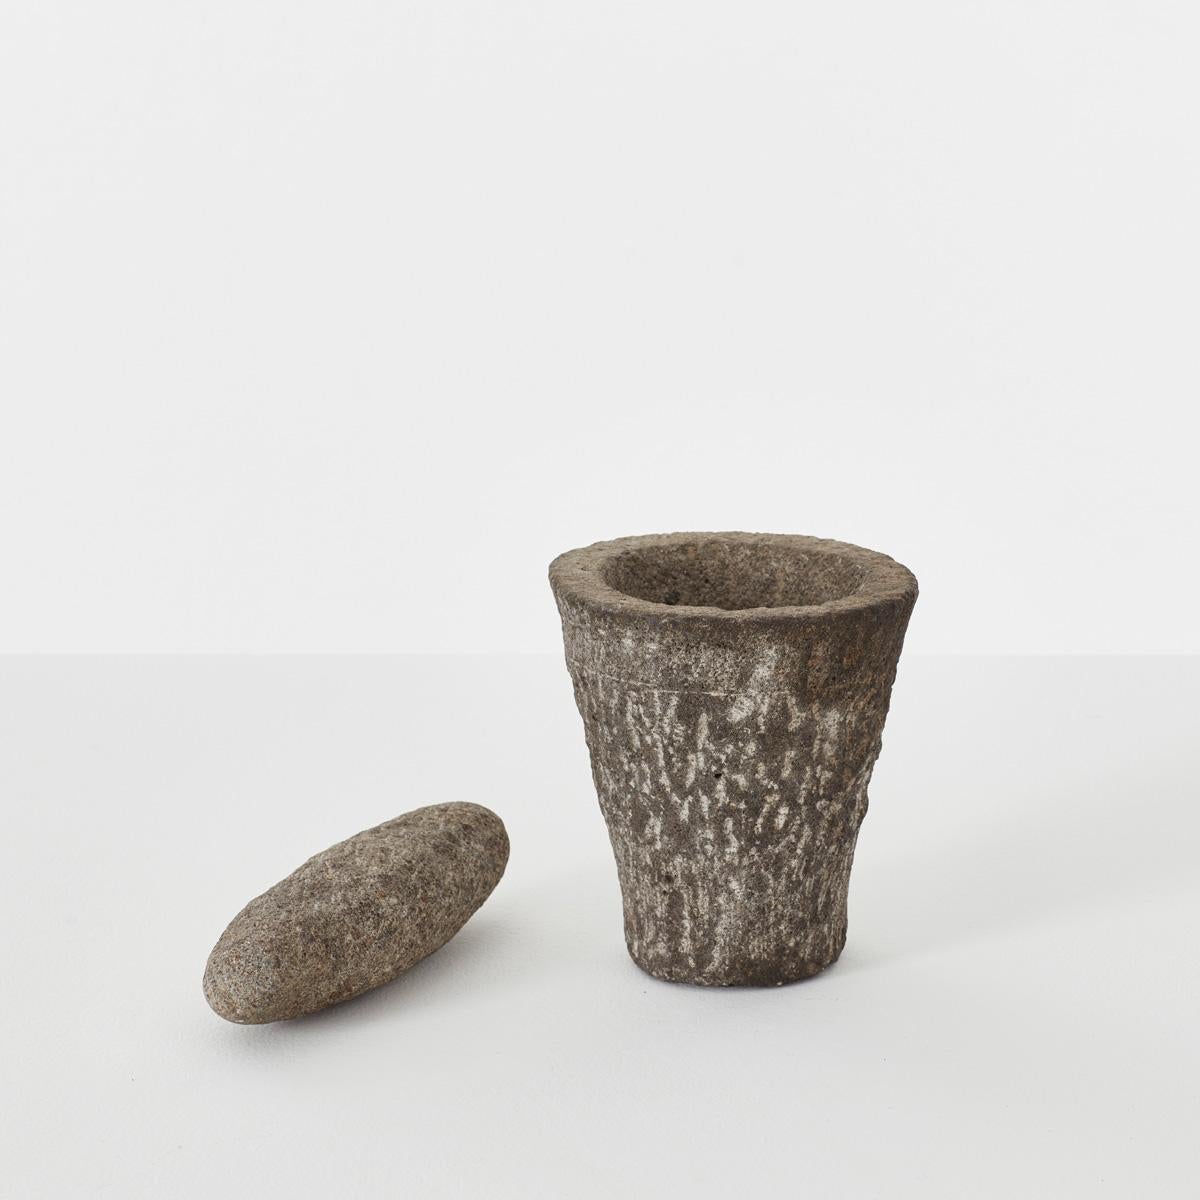 20th Century Early 1900s Naive Stone Mortar and Pestle, France